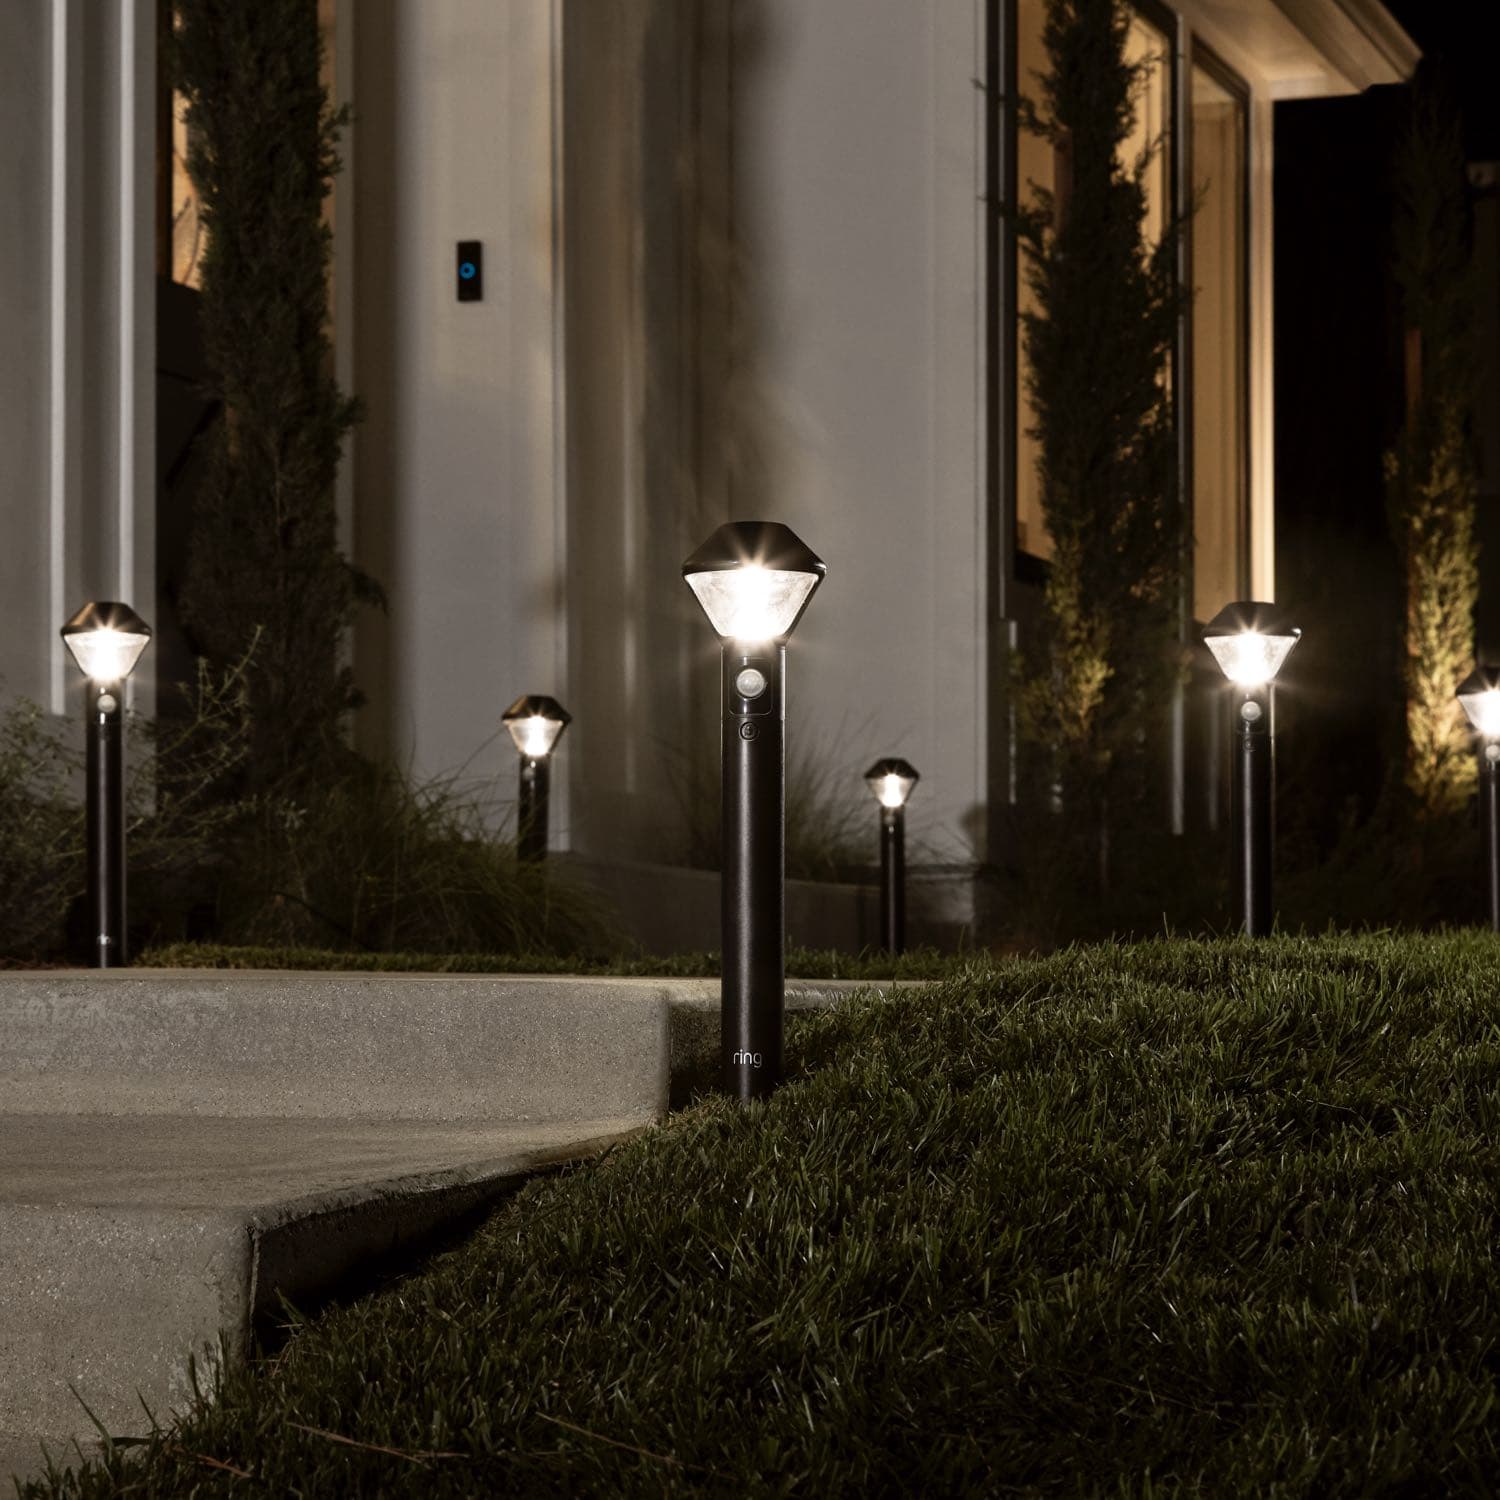 Smart Lighting Pathlight Battery - Outdoors at night, several Pathlights illuminate the walkway to the front door of a home.